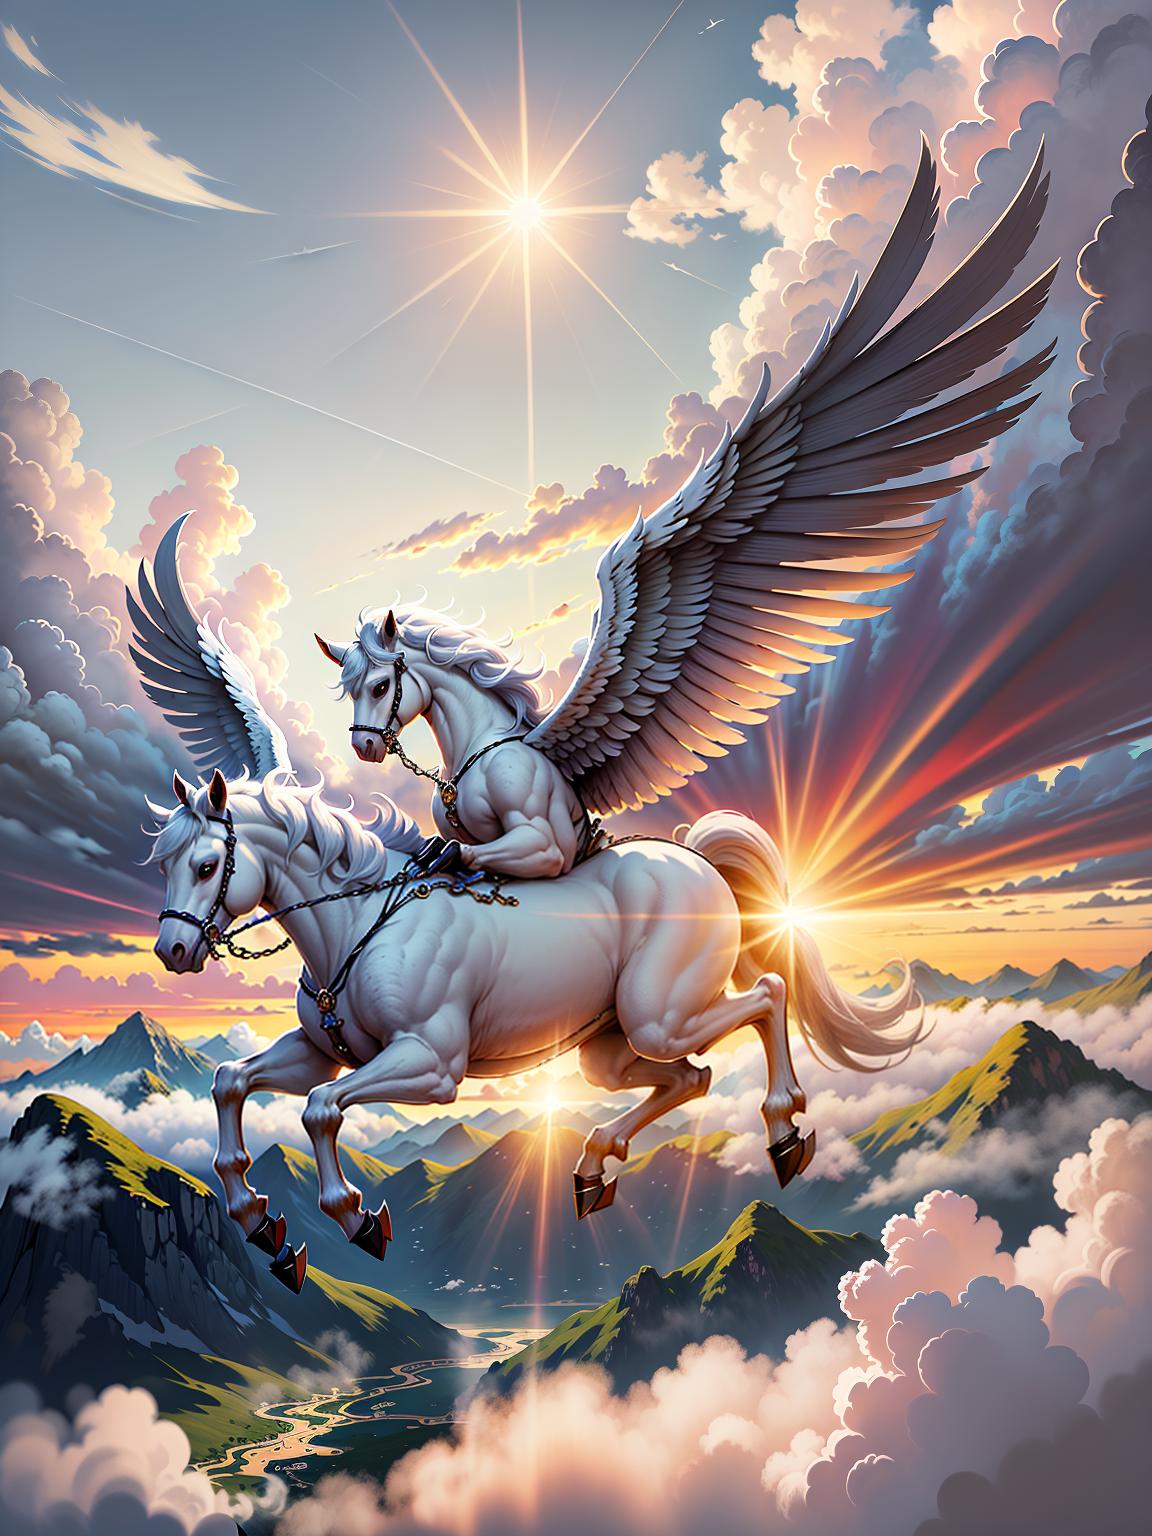  master piece, best quality, ultra detailed, highres, 4k.8k, Pegasus, Flying gracefully in the sky, Serene, BREAK Pegasus Flying in the Sky., Above the clouds, Clouds, Sun, Trees, Mountains, BREAK Peaceful and serene, Sunlight shining through the clouds, fun00d